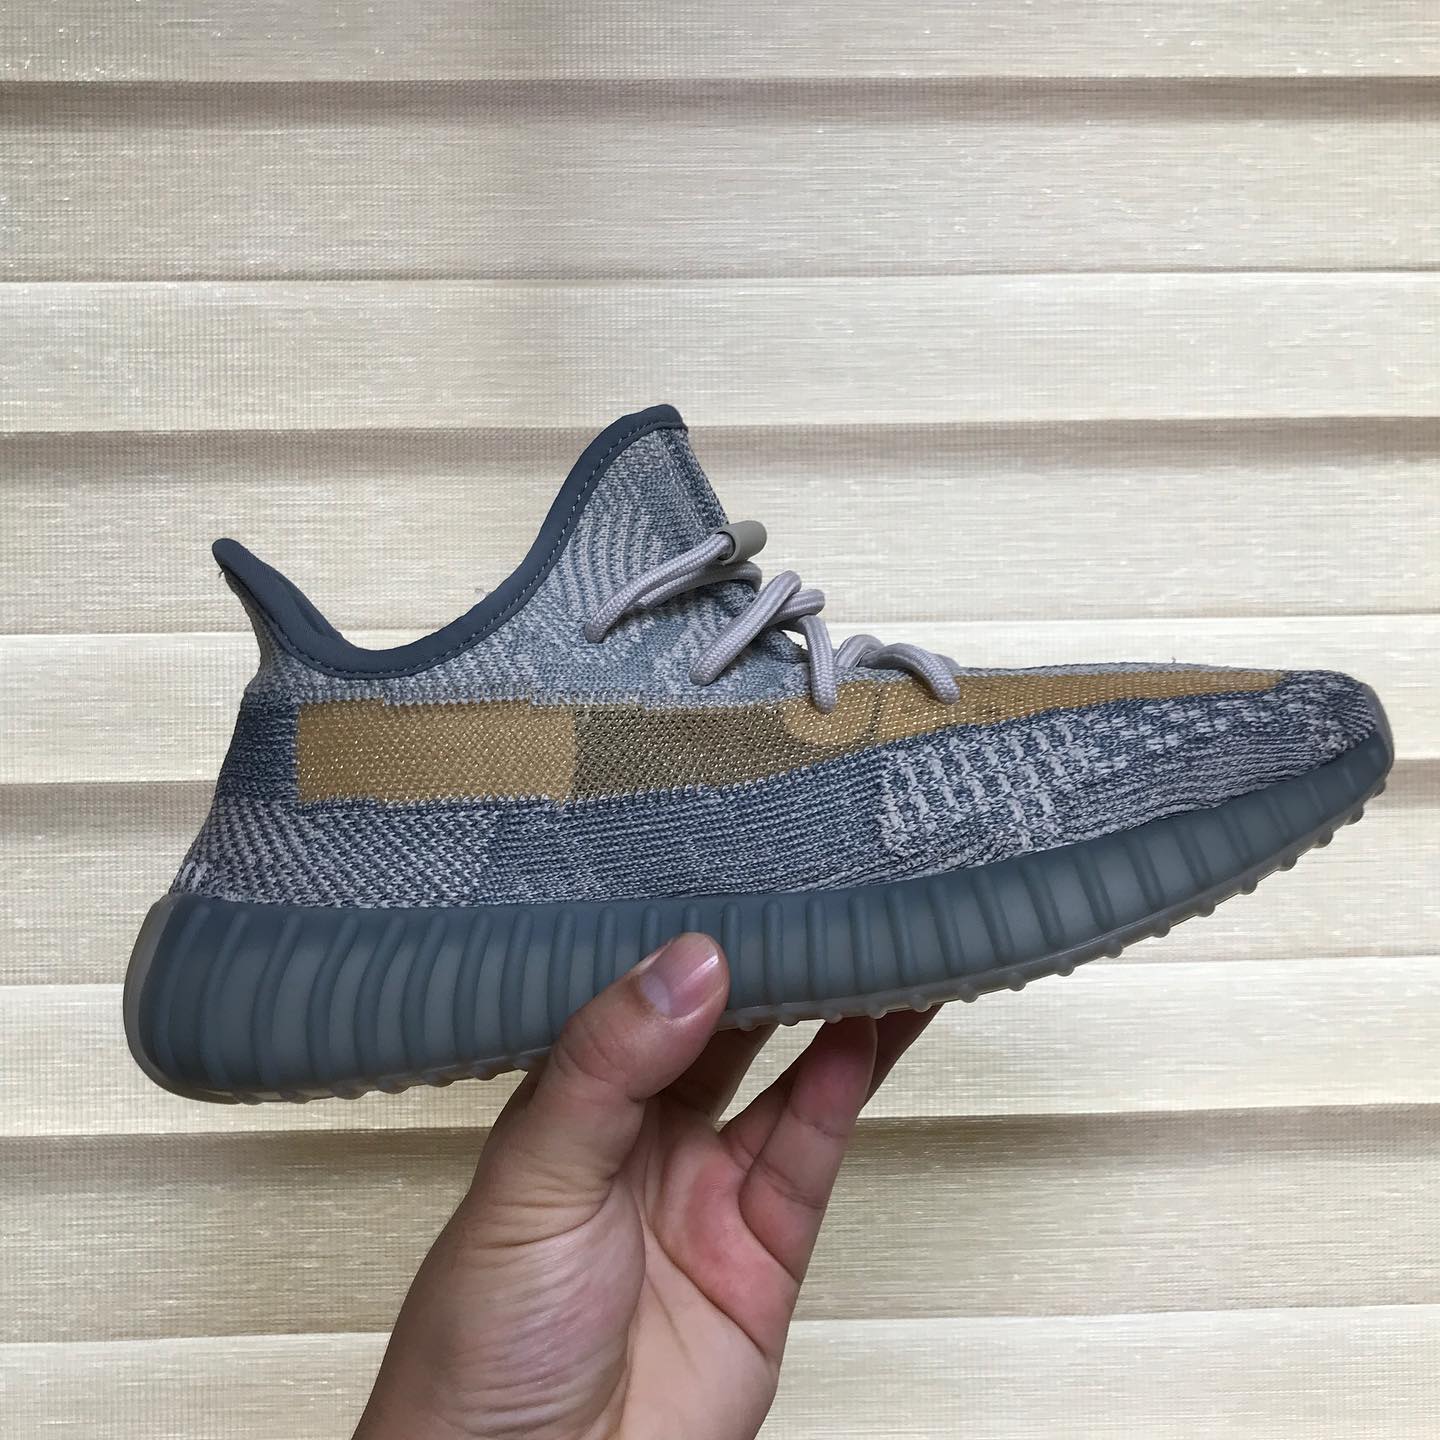 Adidas Yeezy Boost 350 V2 Israfil Sneakers Shoes